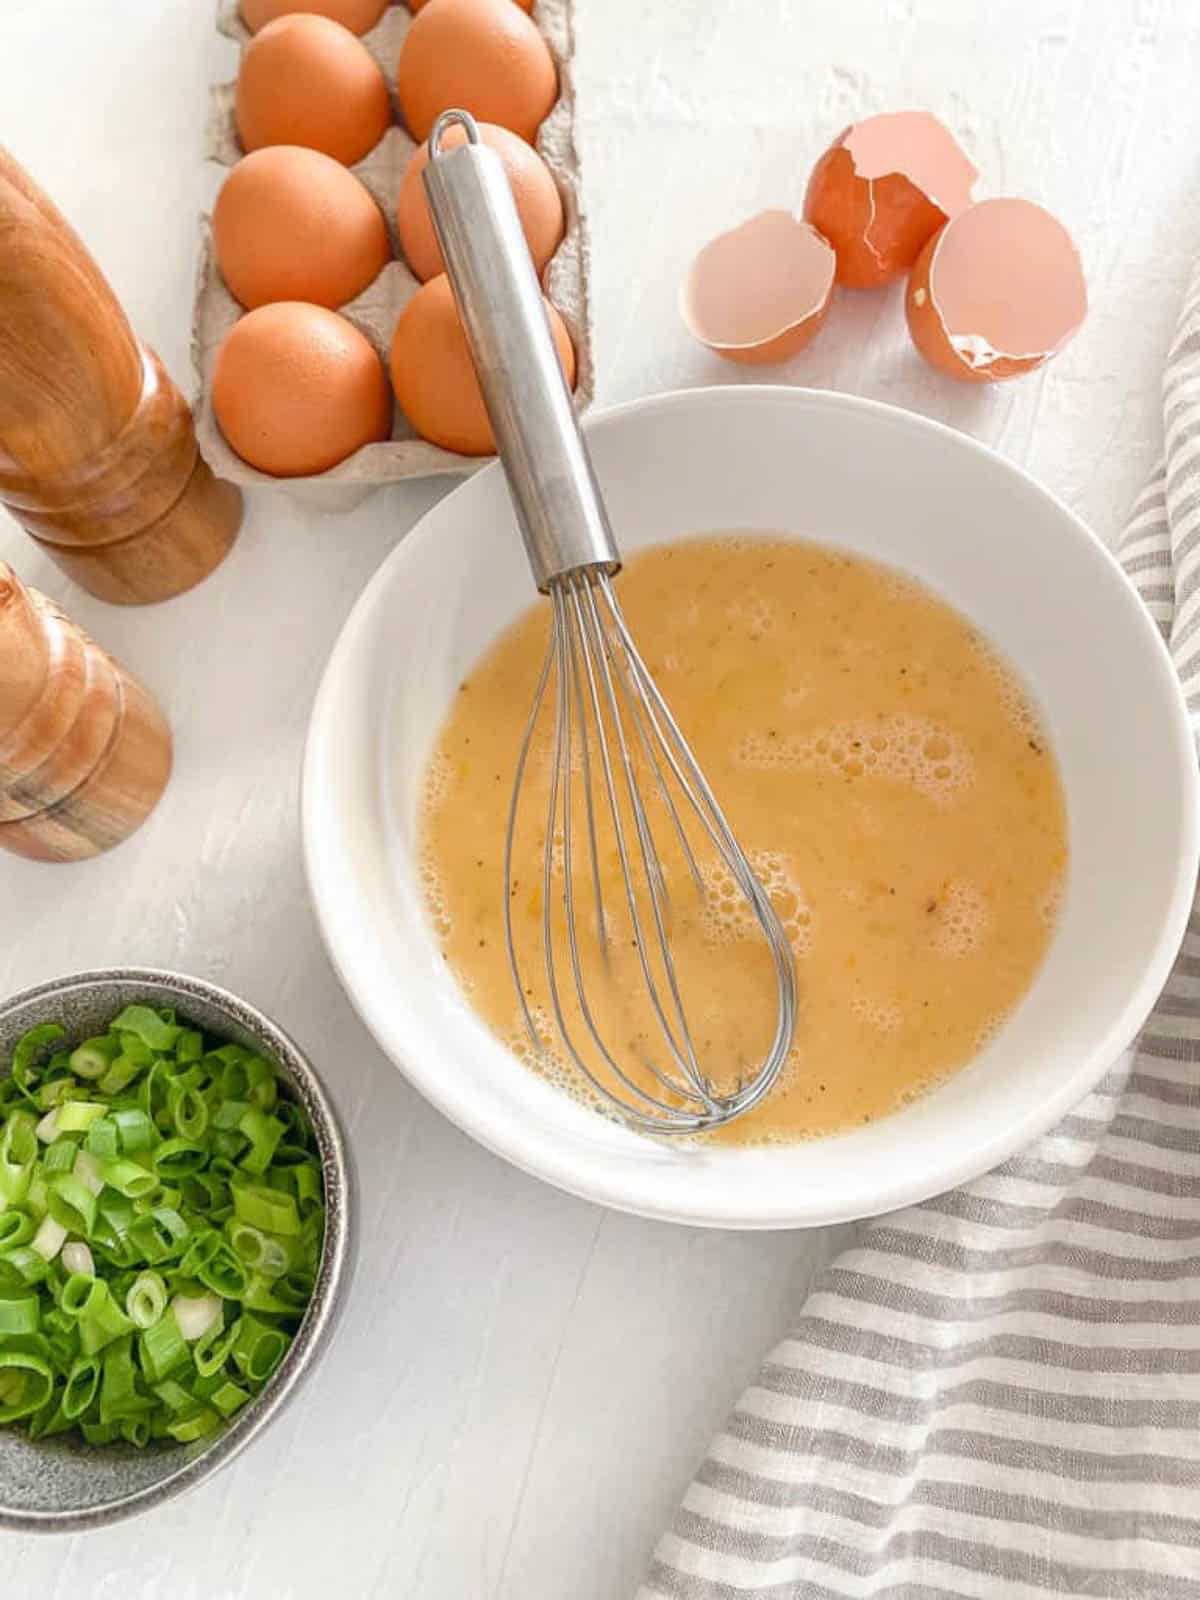 Whisking the eggs up in a white bowl on the counter with a napkin.